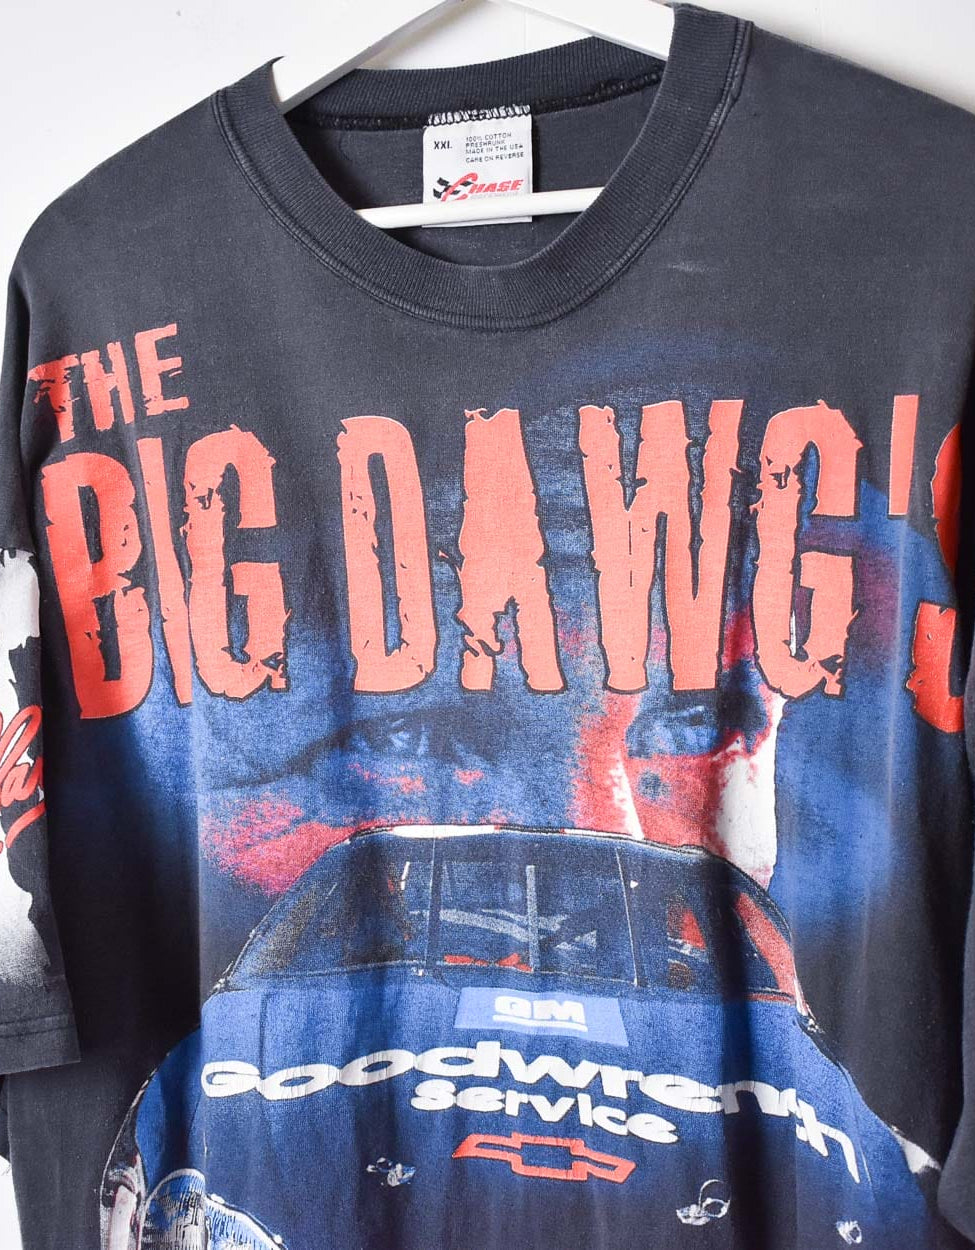 Black Chase Authentics Nascar Dale Earnhardt The Big Dawg's Back Stay On The Porch T-Shirt - XX-Large